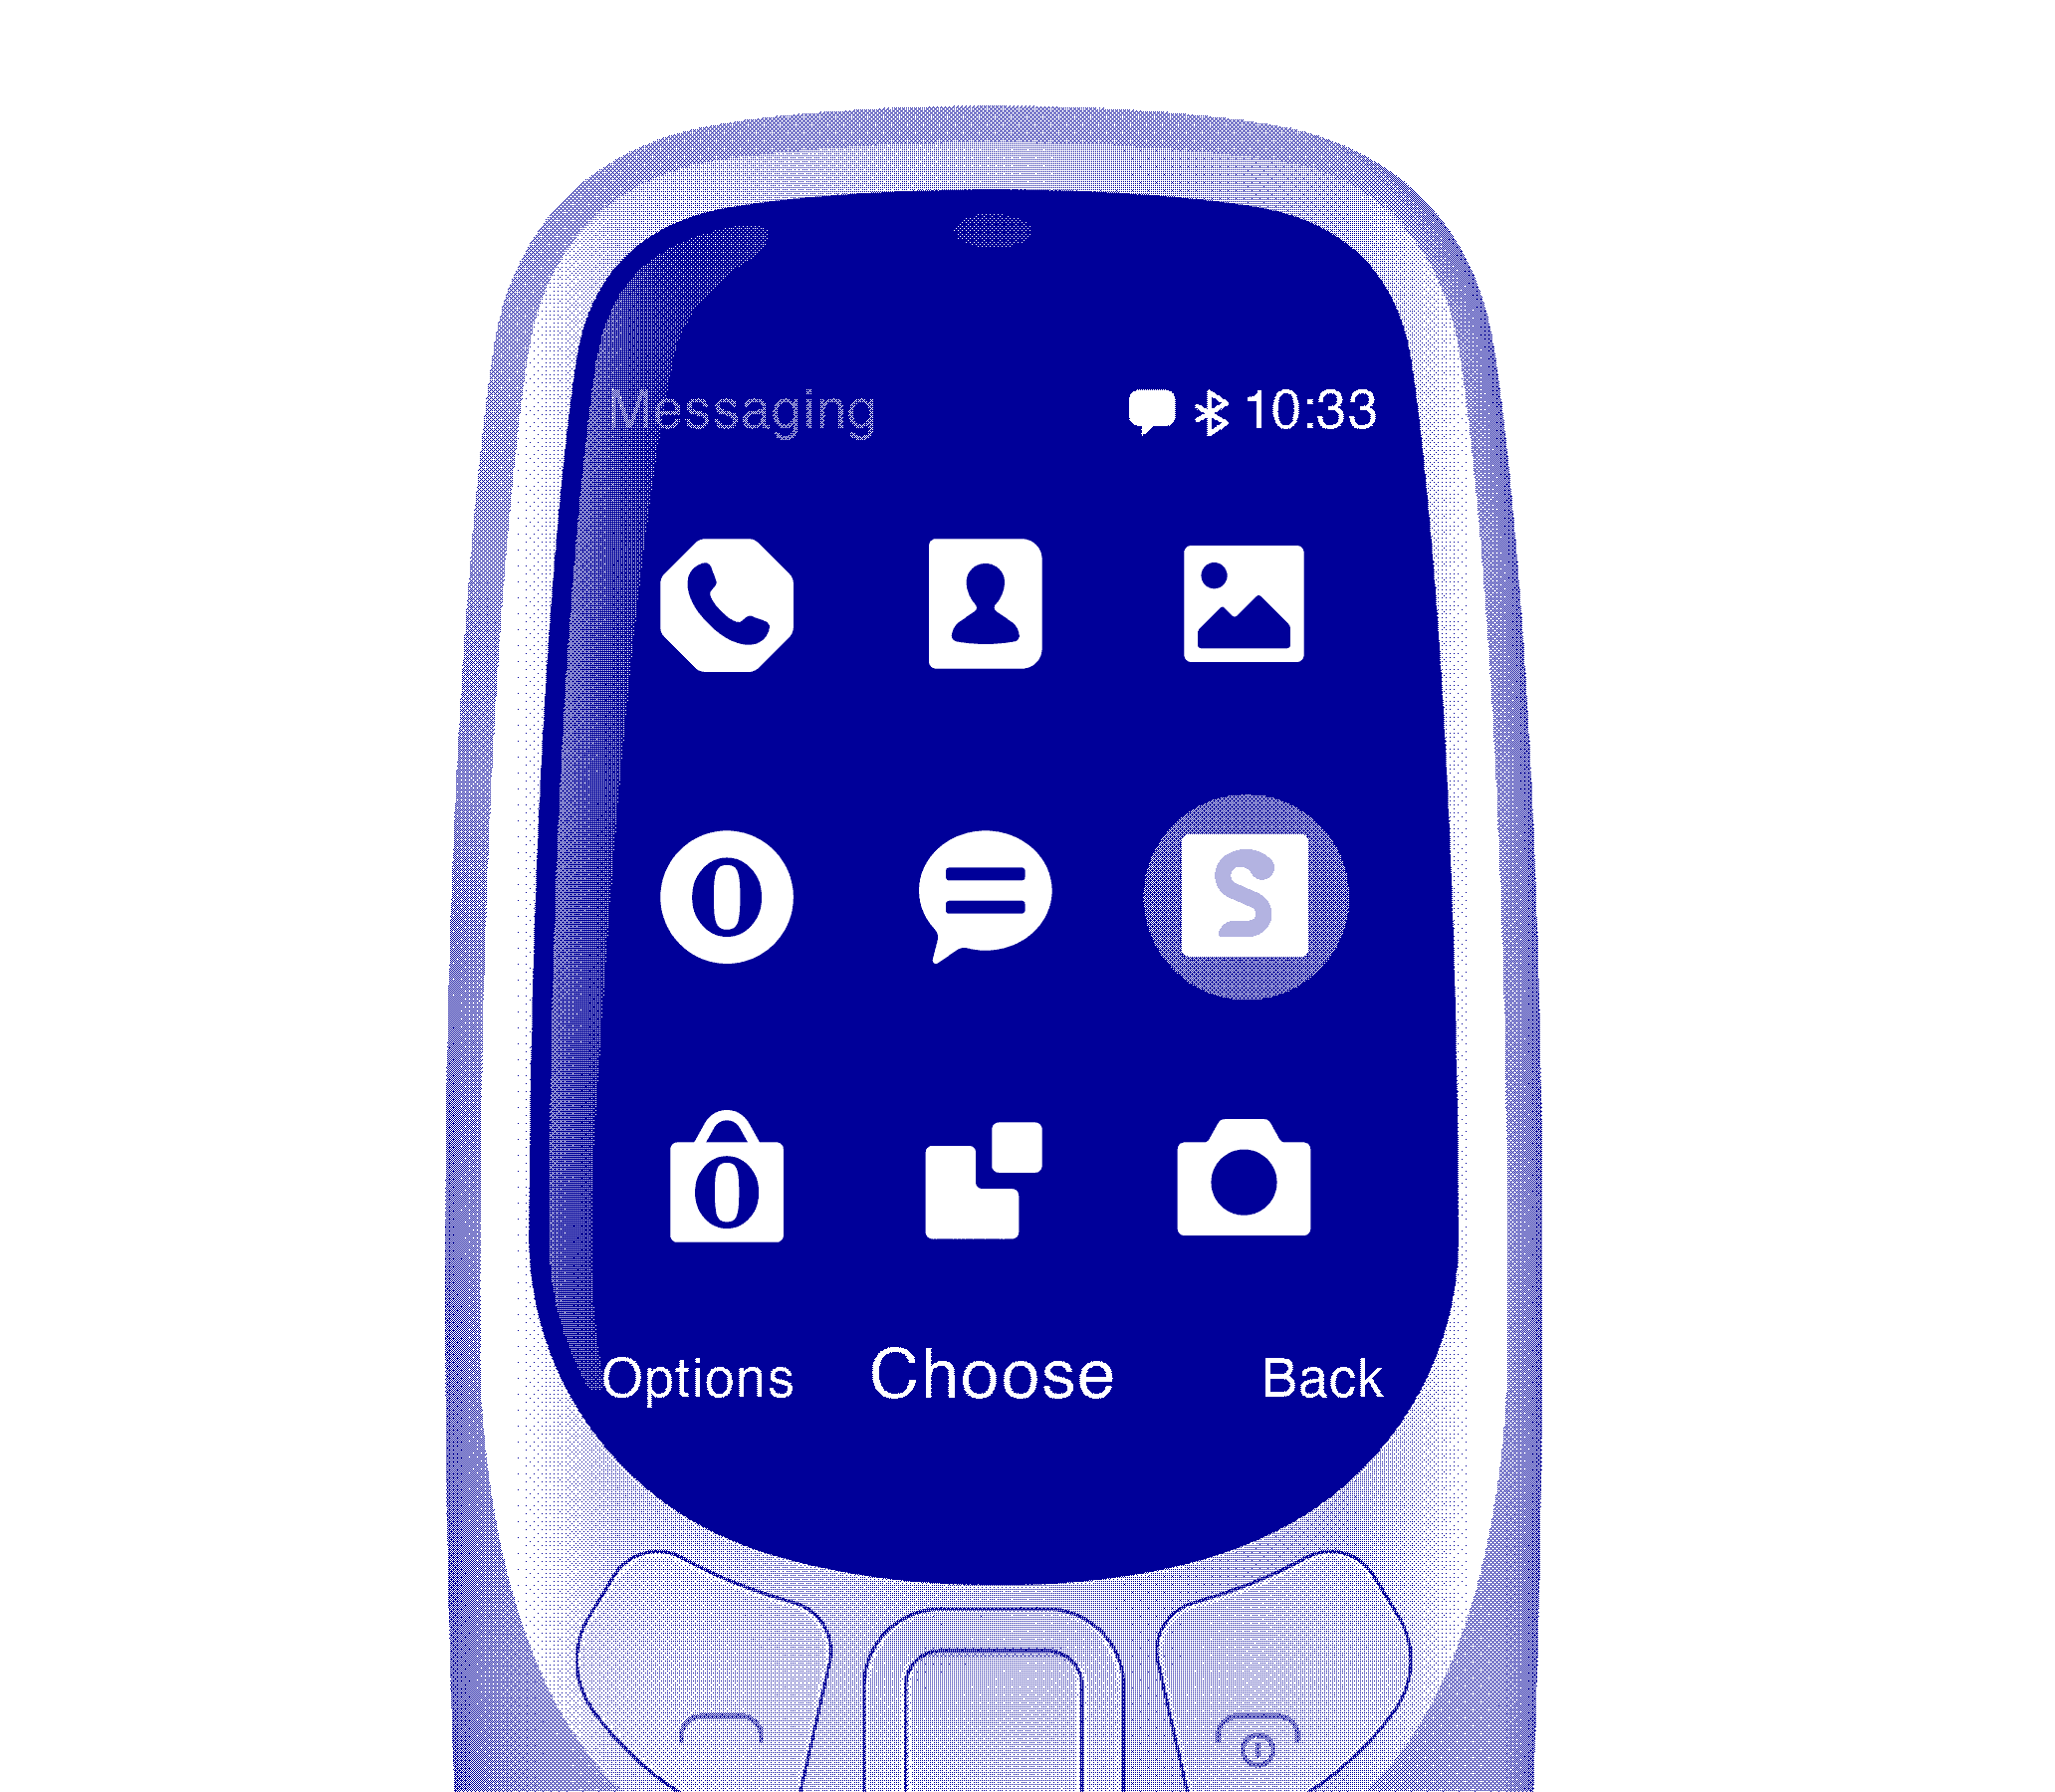 A close up of the main menu icons on the homepage of the Nokia 3310 device.